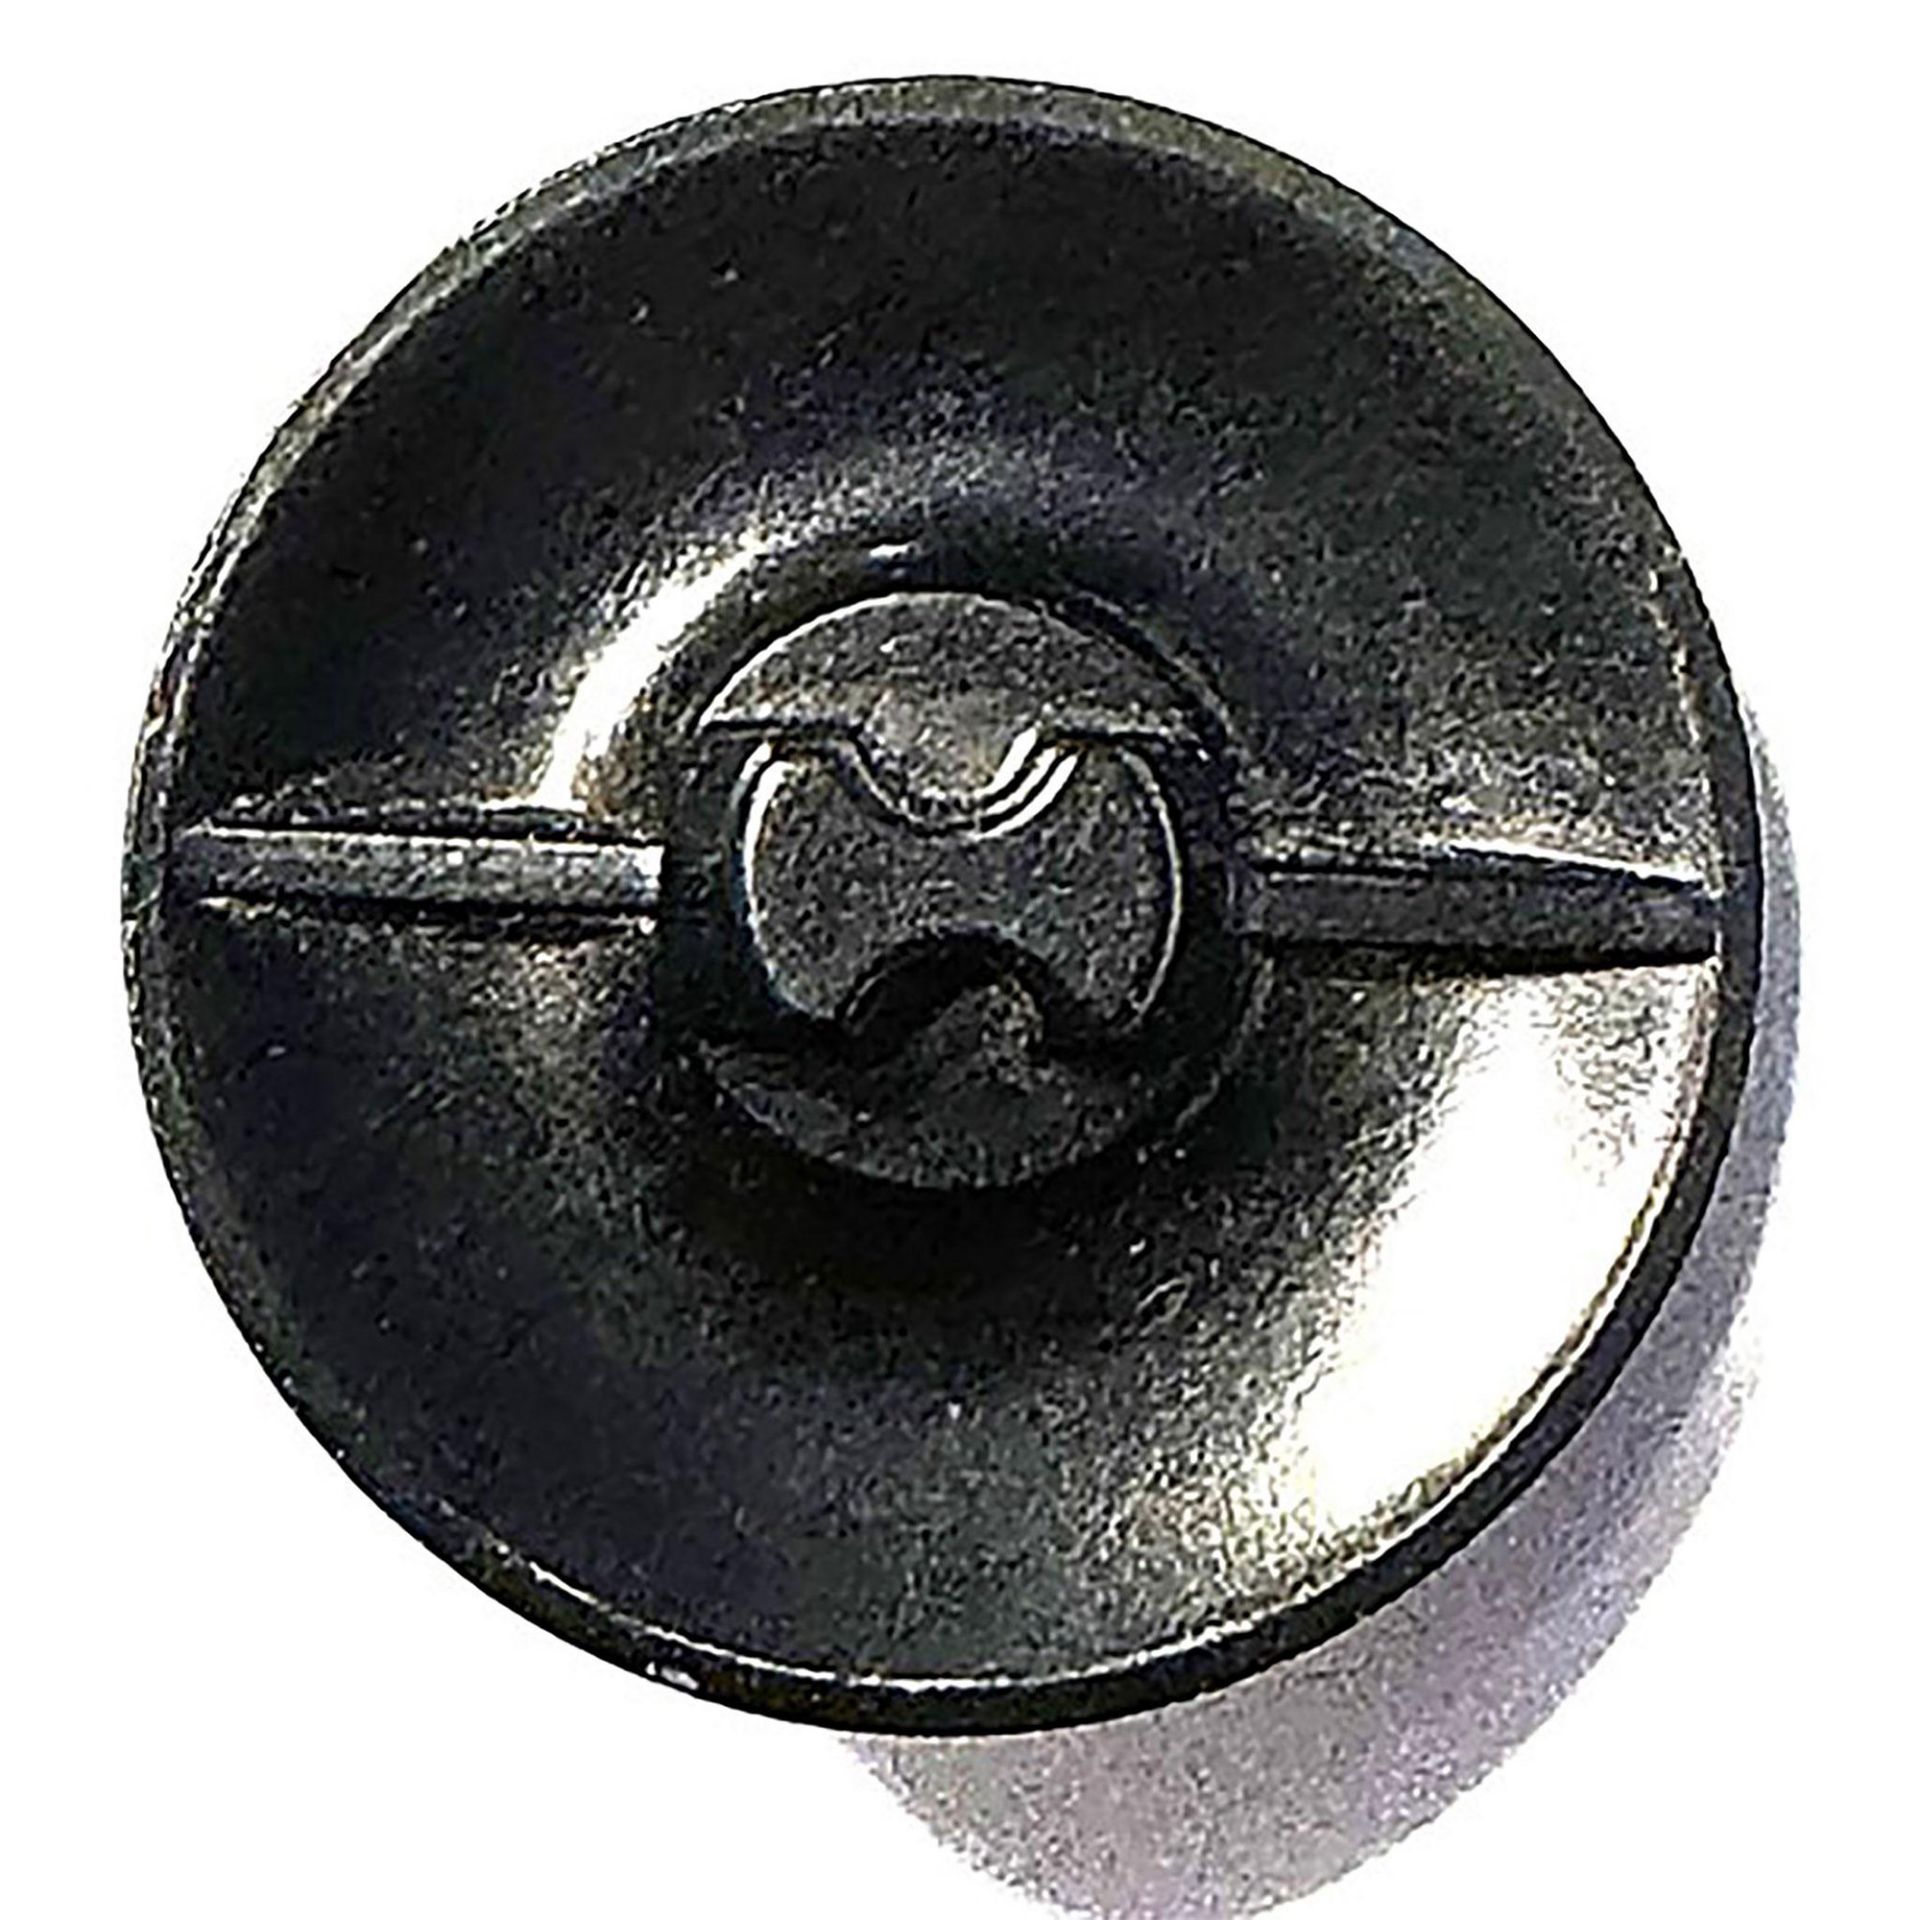 A division three COLT firearms plastic button - Image 3 of 3